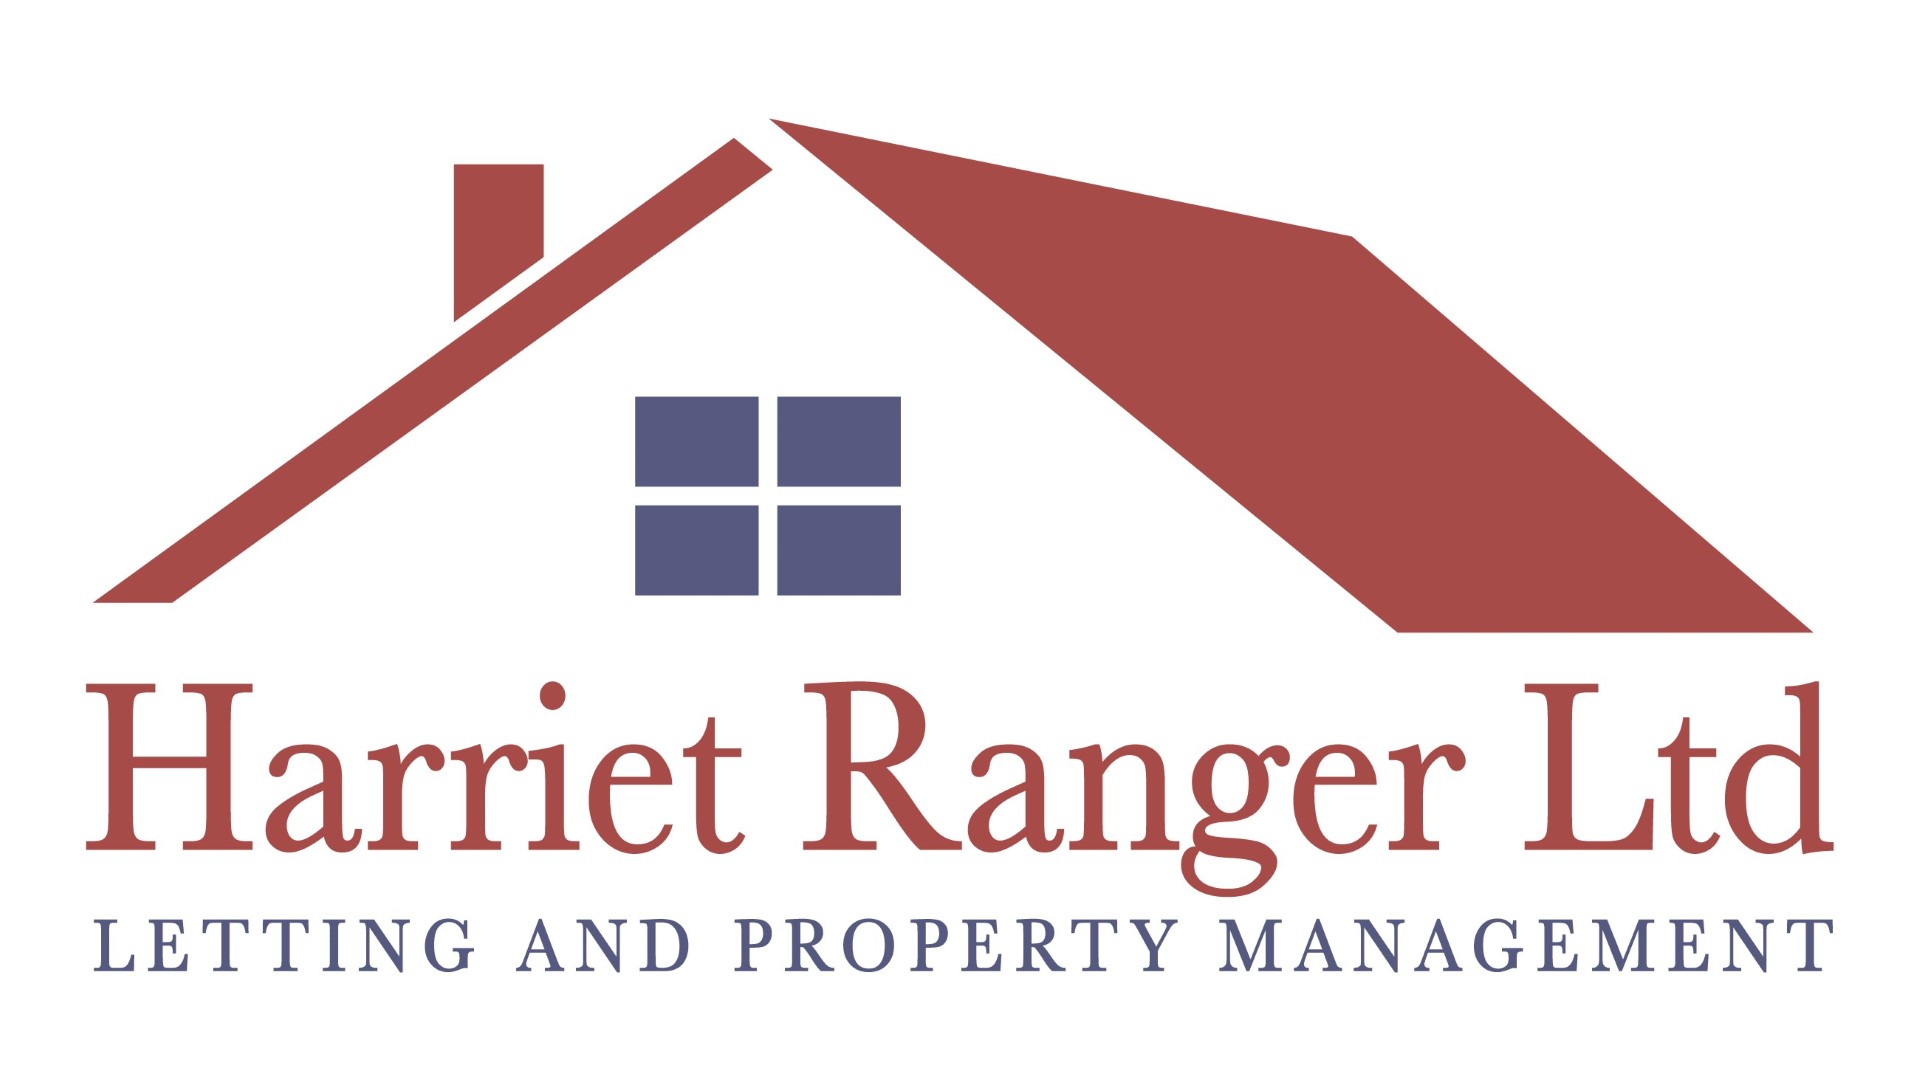 Harriet Ranger Lettings and Property Management